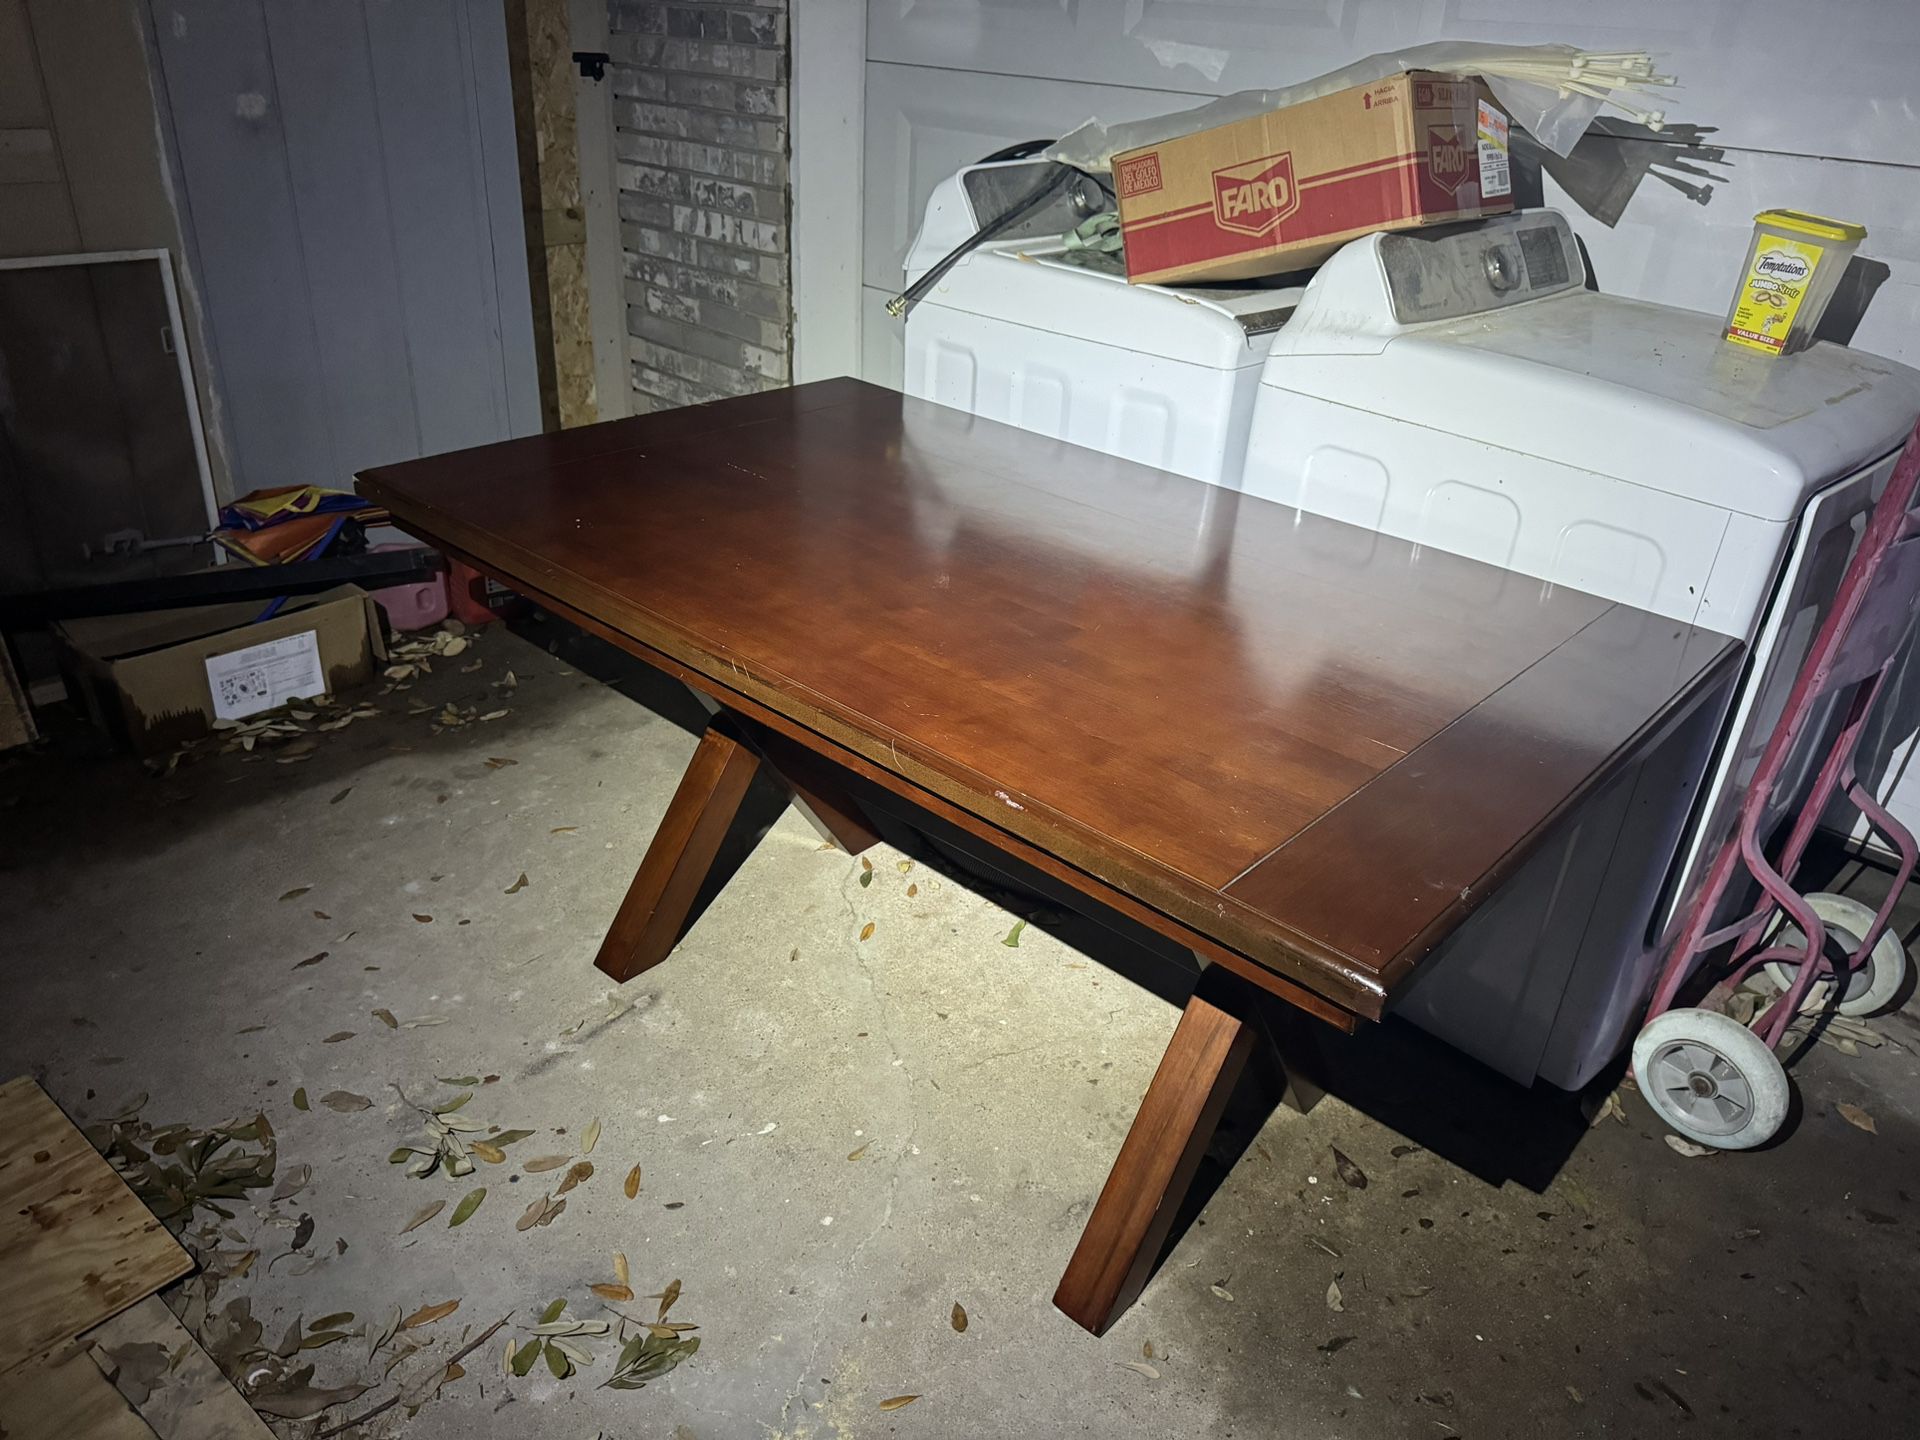 Farm House Table For 4 People 